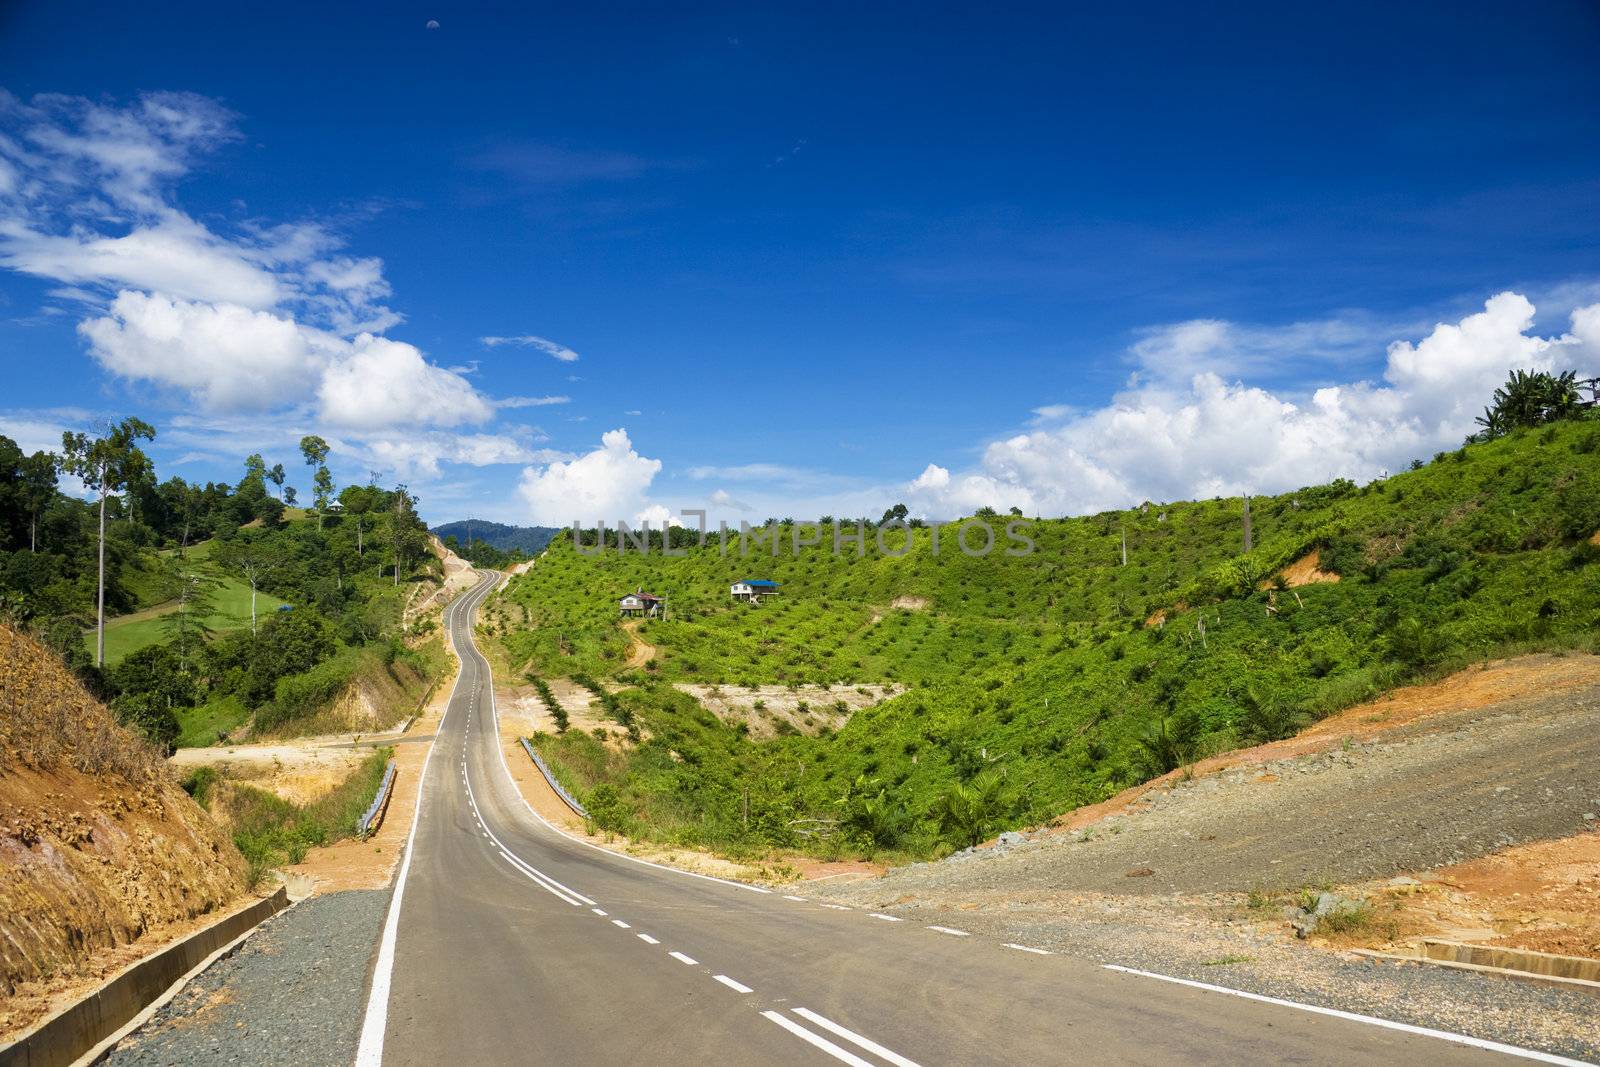 Image of a new road through an oil palm estate at Tawau, Malaysia.